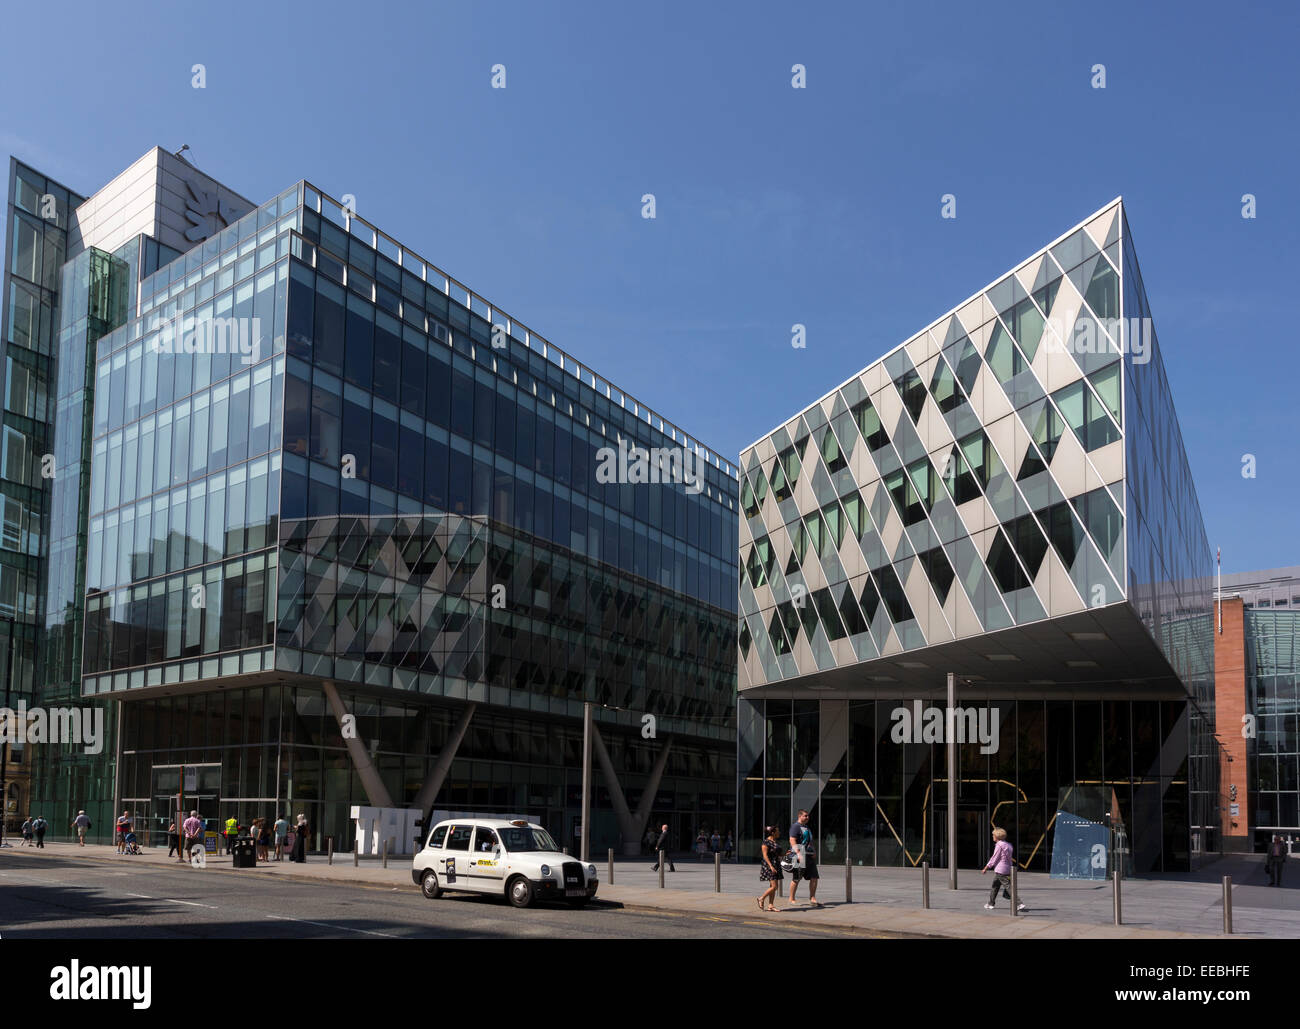 England, Manchester, Modern architecture at Spinningfields financial district Stock Photo